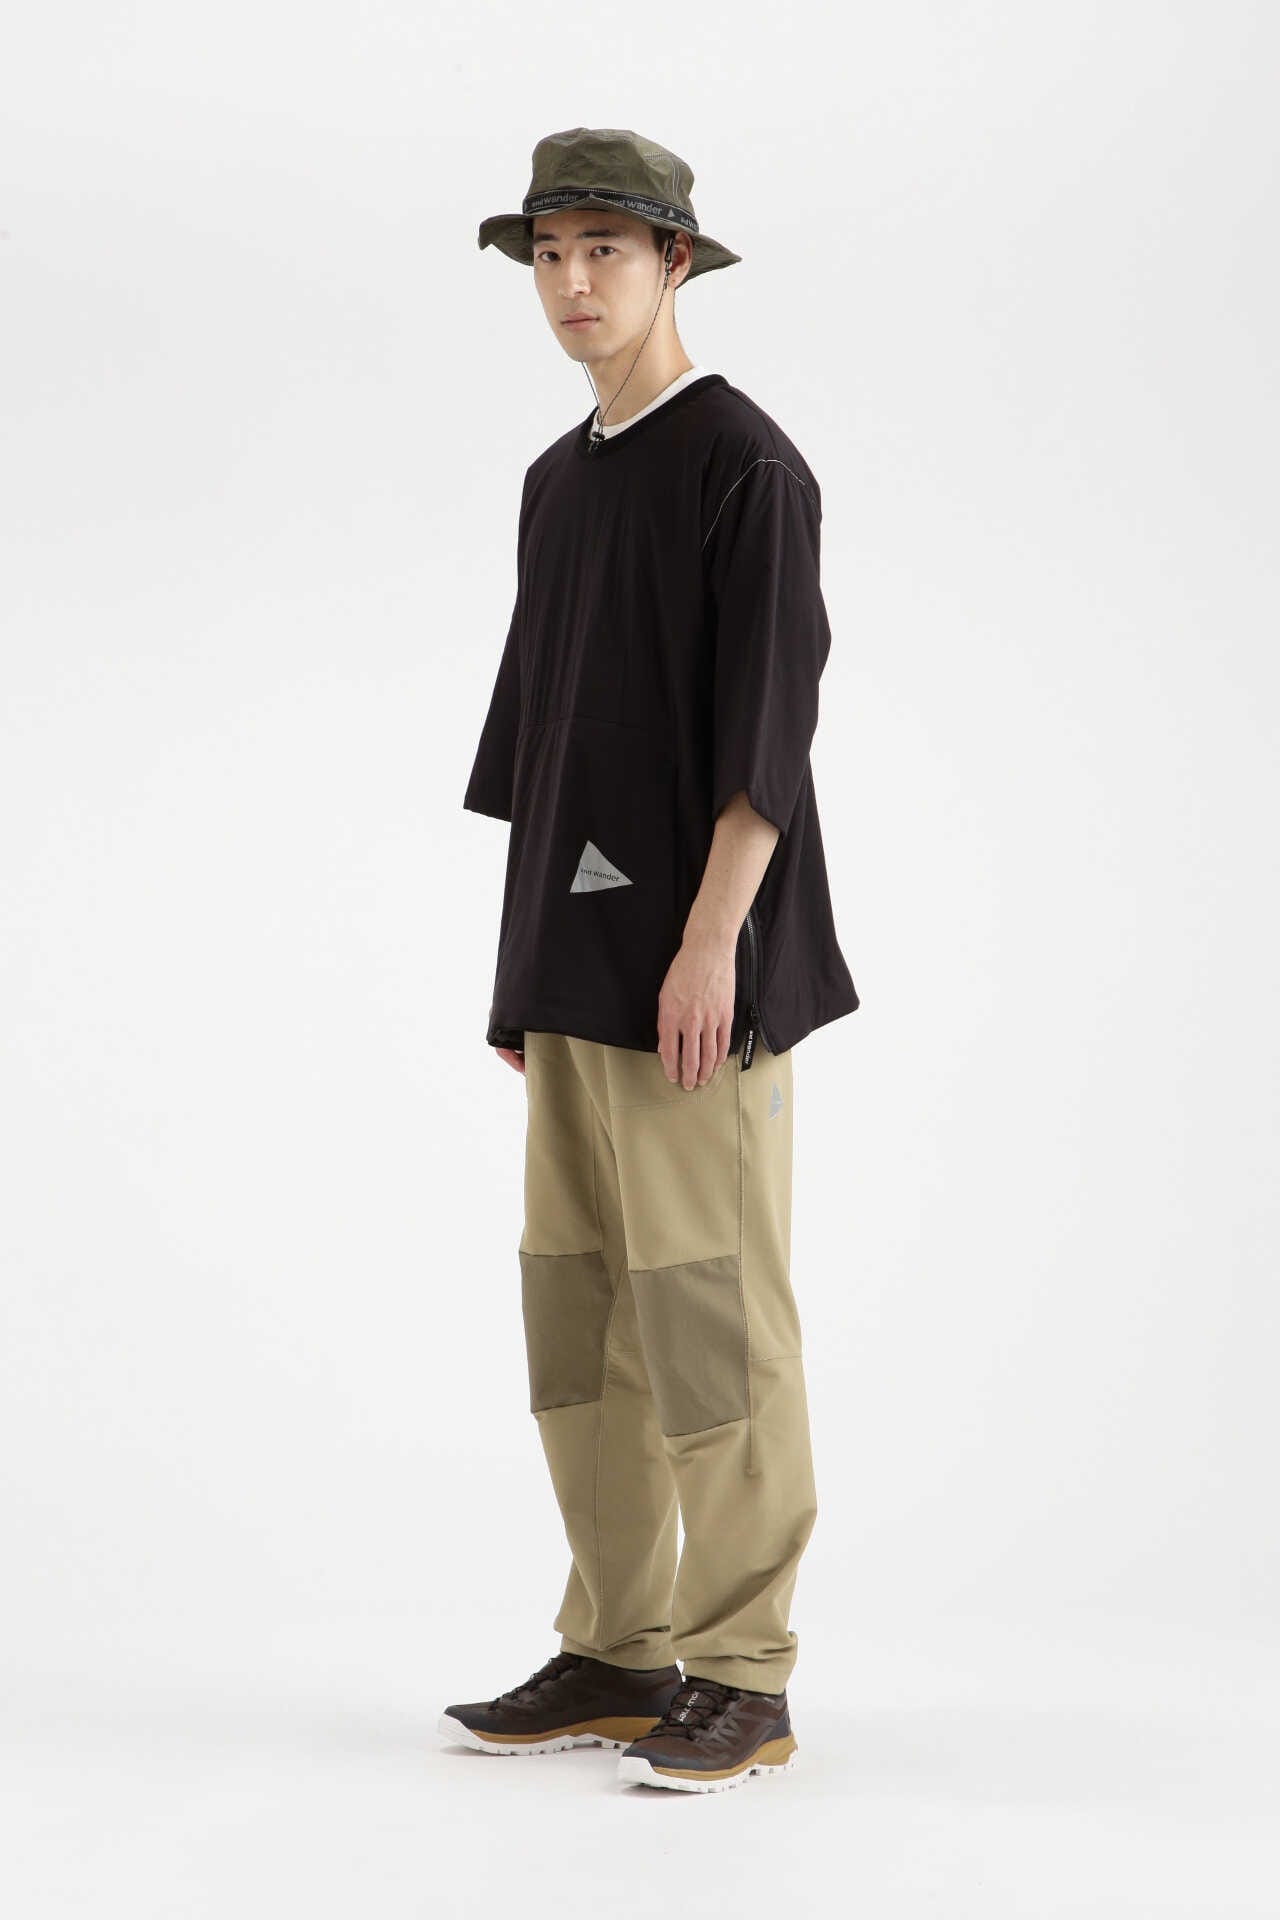 stretch shell tapered pants